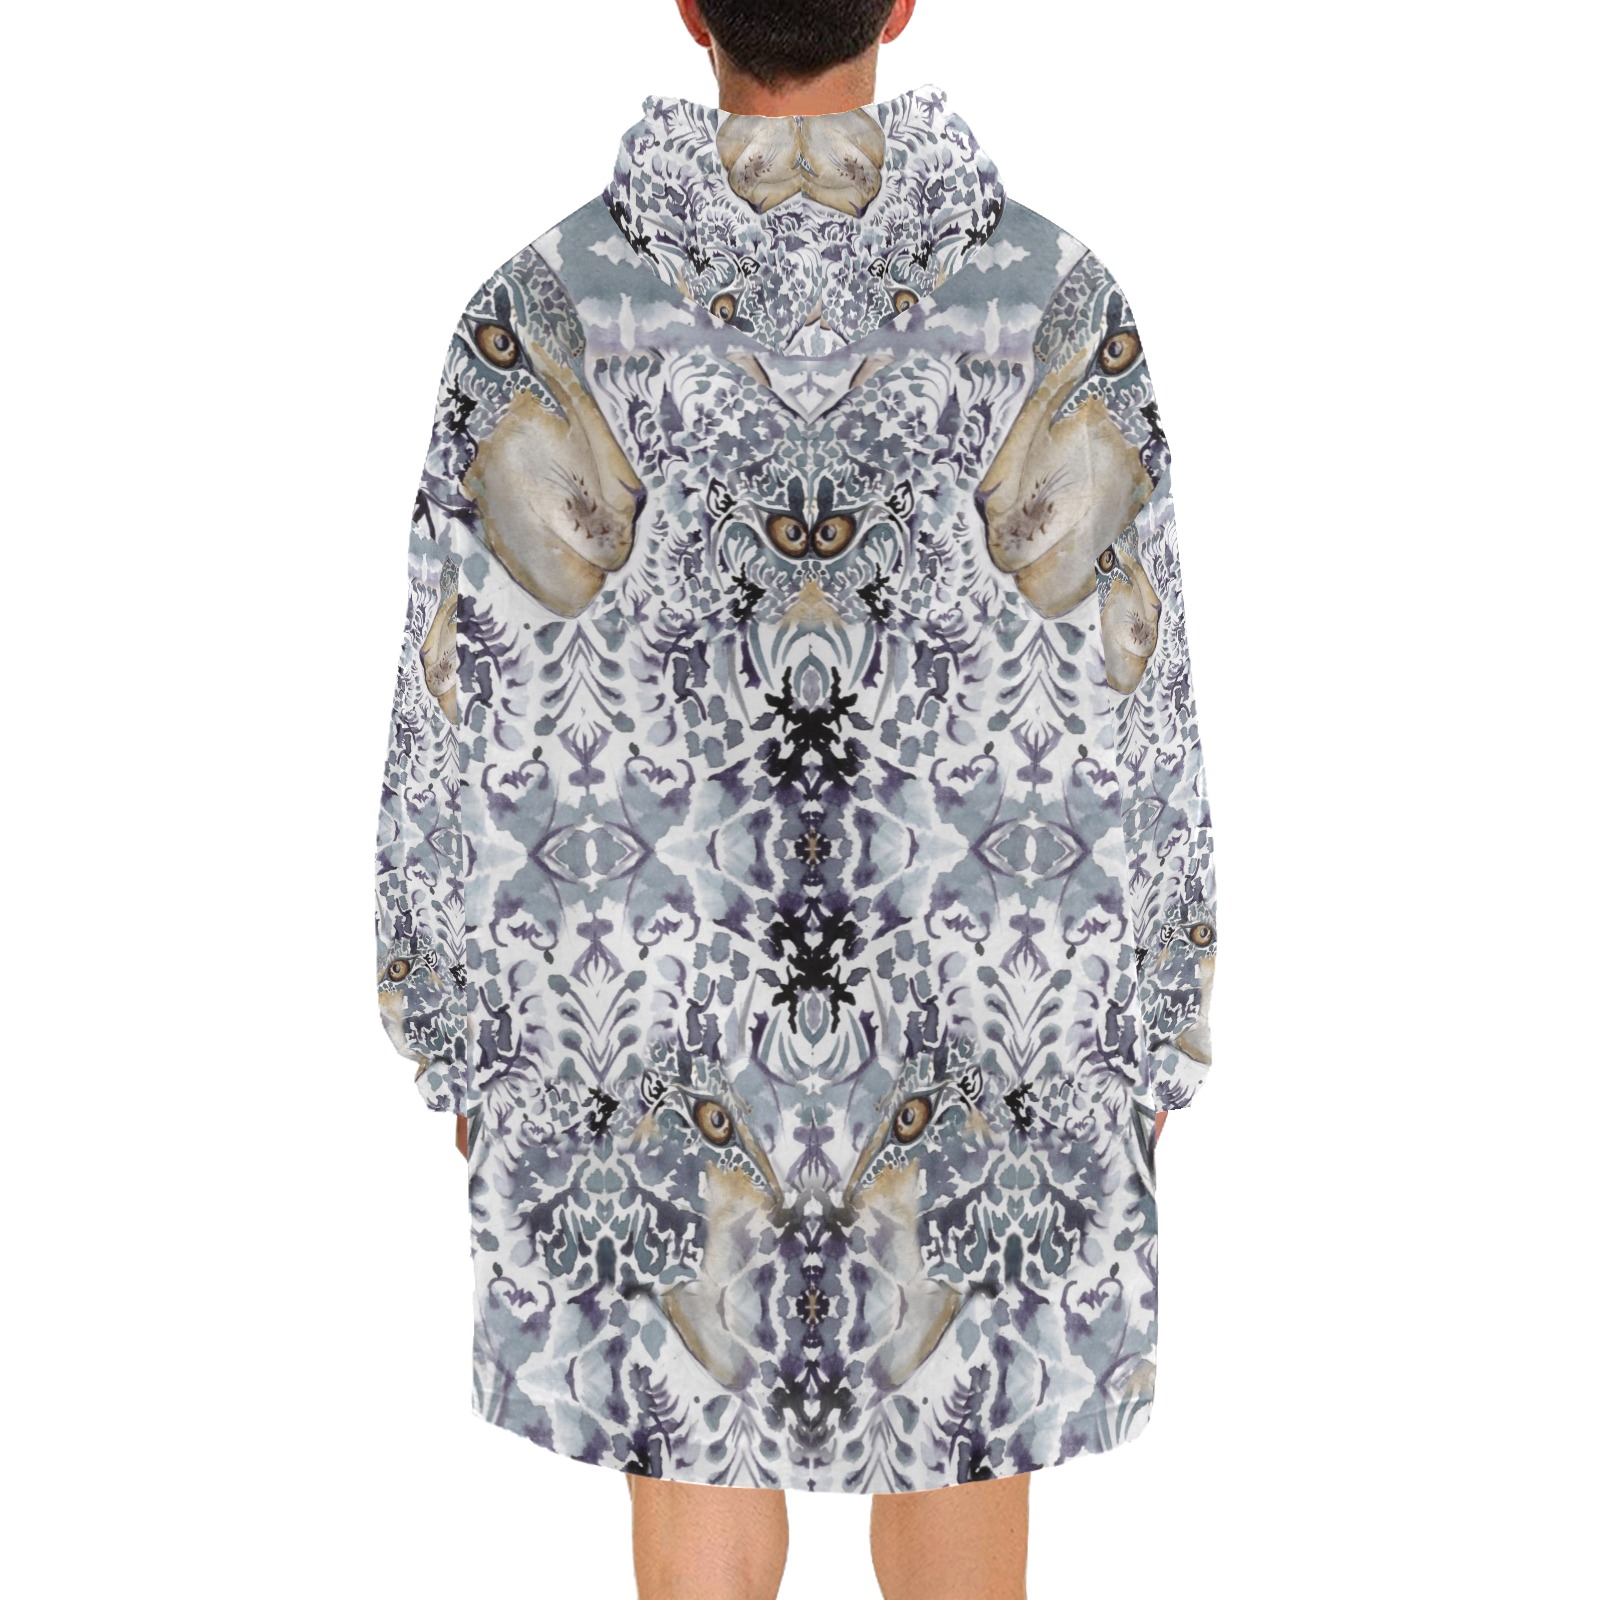 Nidhi December 2014-pattern 4-gray-44x55inches Blanket Hoodie for Men